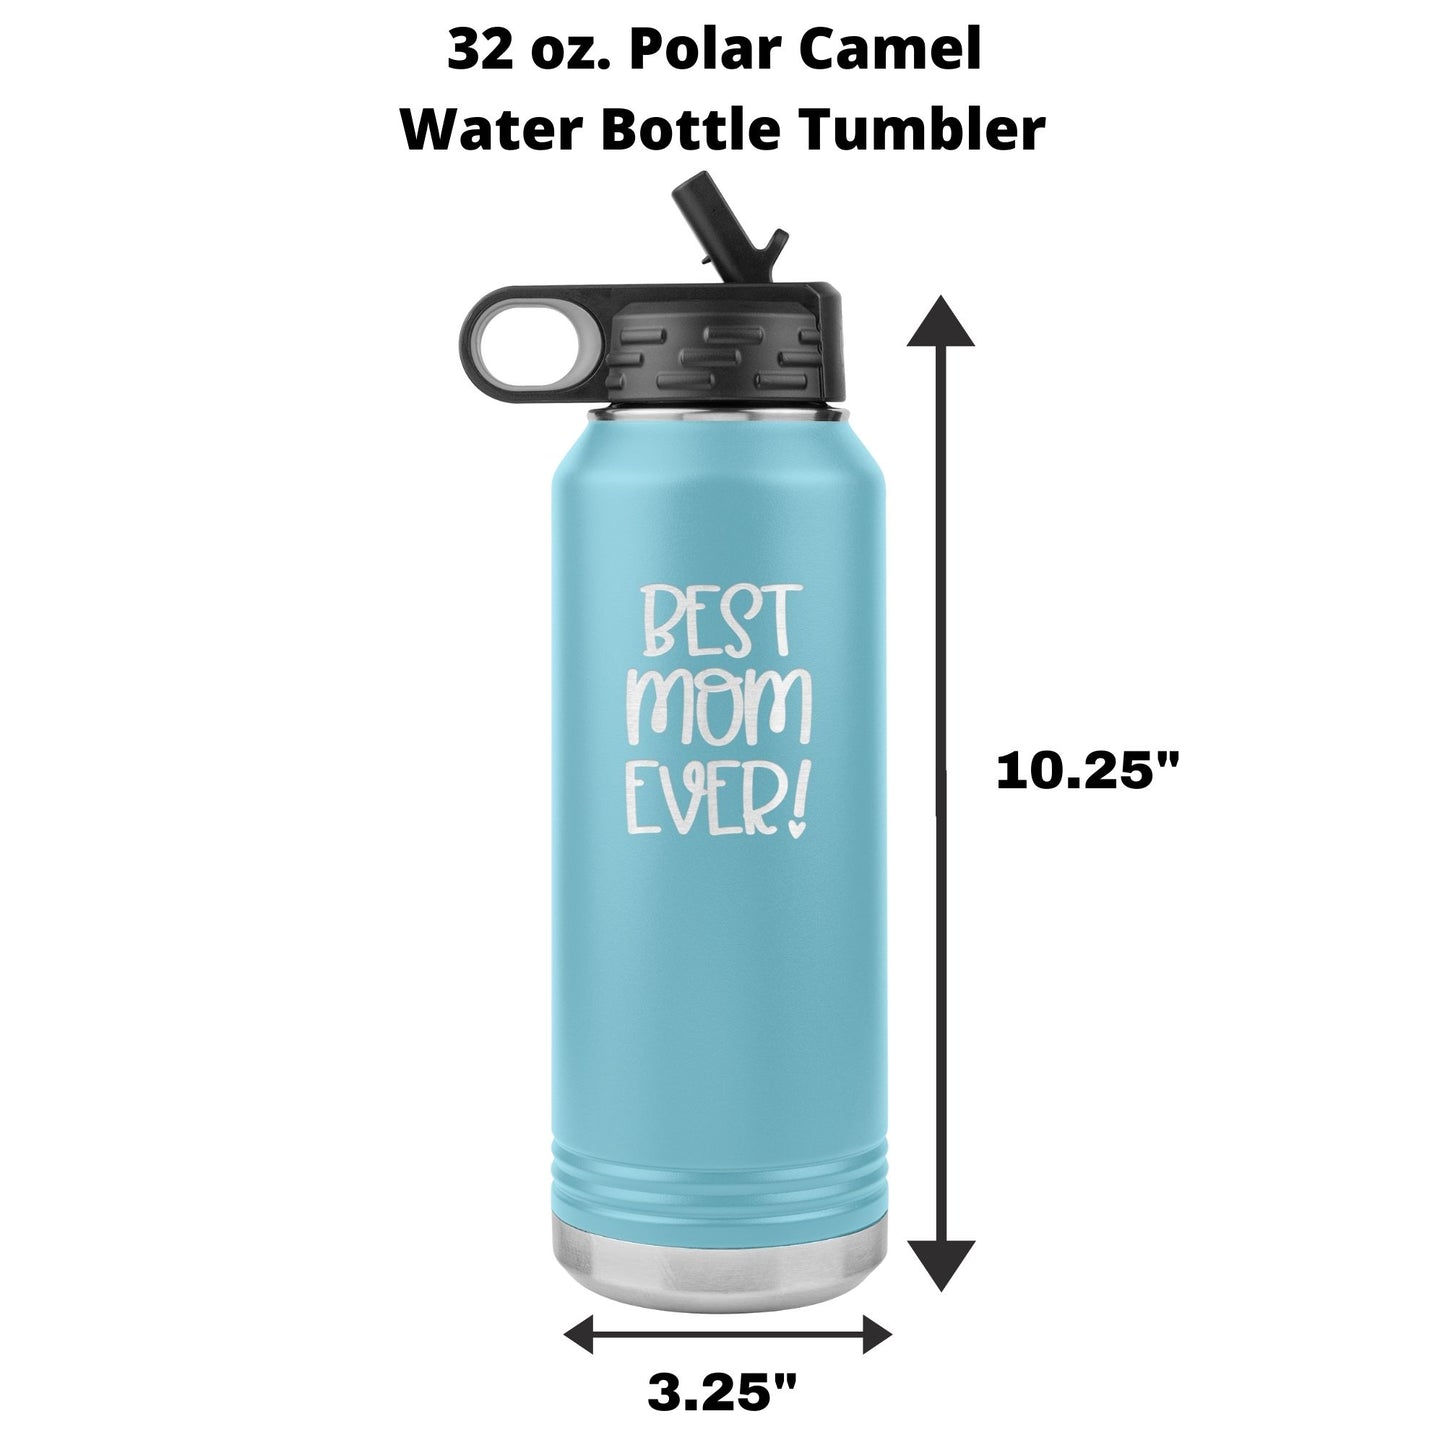 Stainless Steel Insulated Water Bottle Tumbler with Built-in Straw